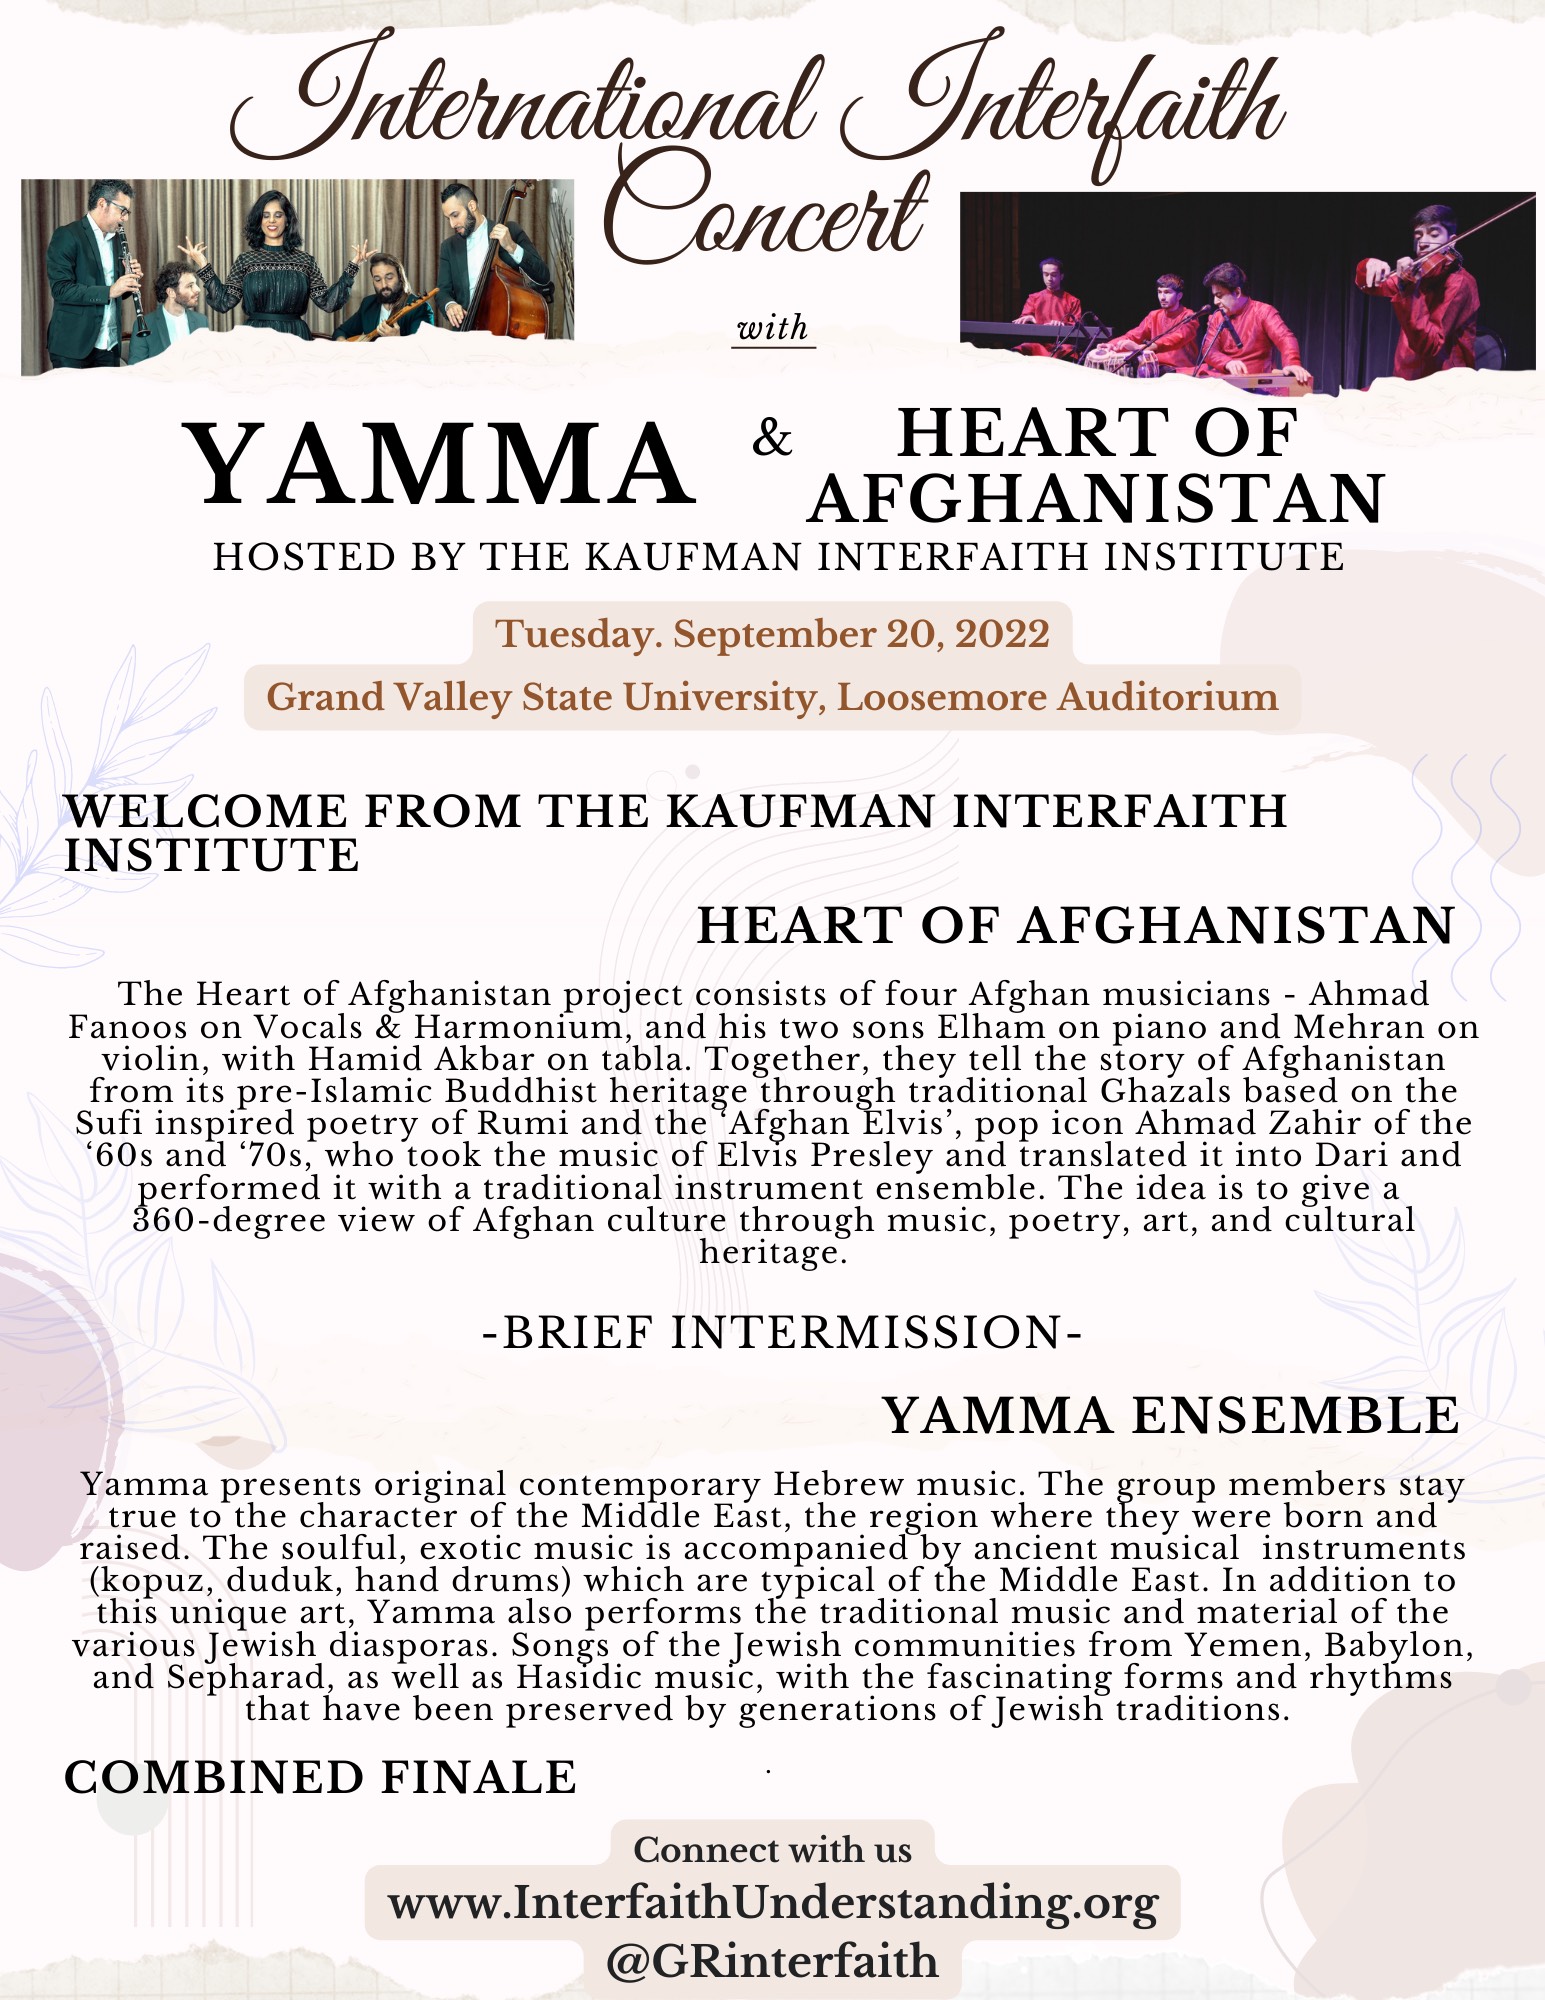 Program Details: Welcome from Kaufman Interfaith Institute. Heart of Afghanistan. Yamma. Combined Finale.